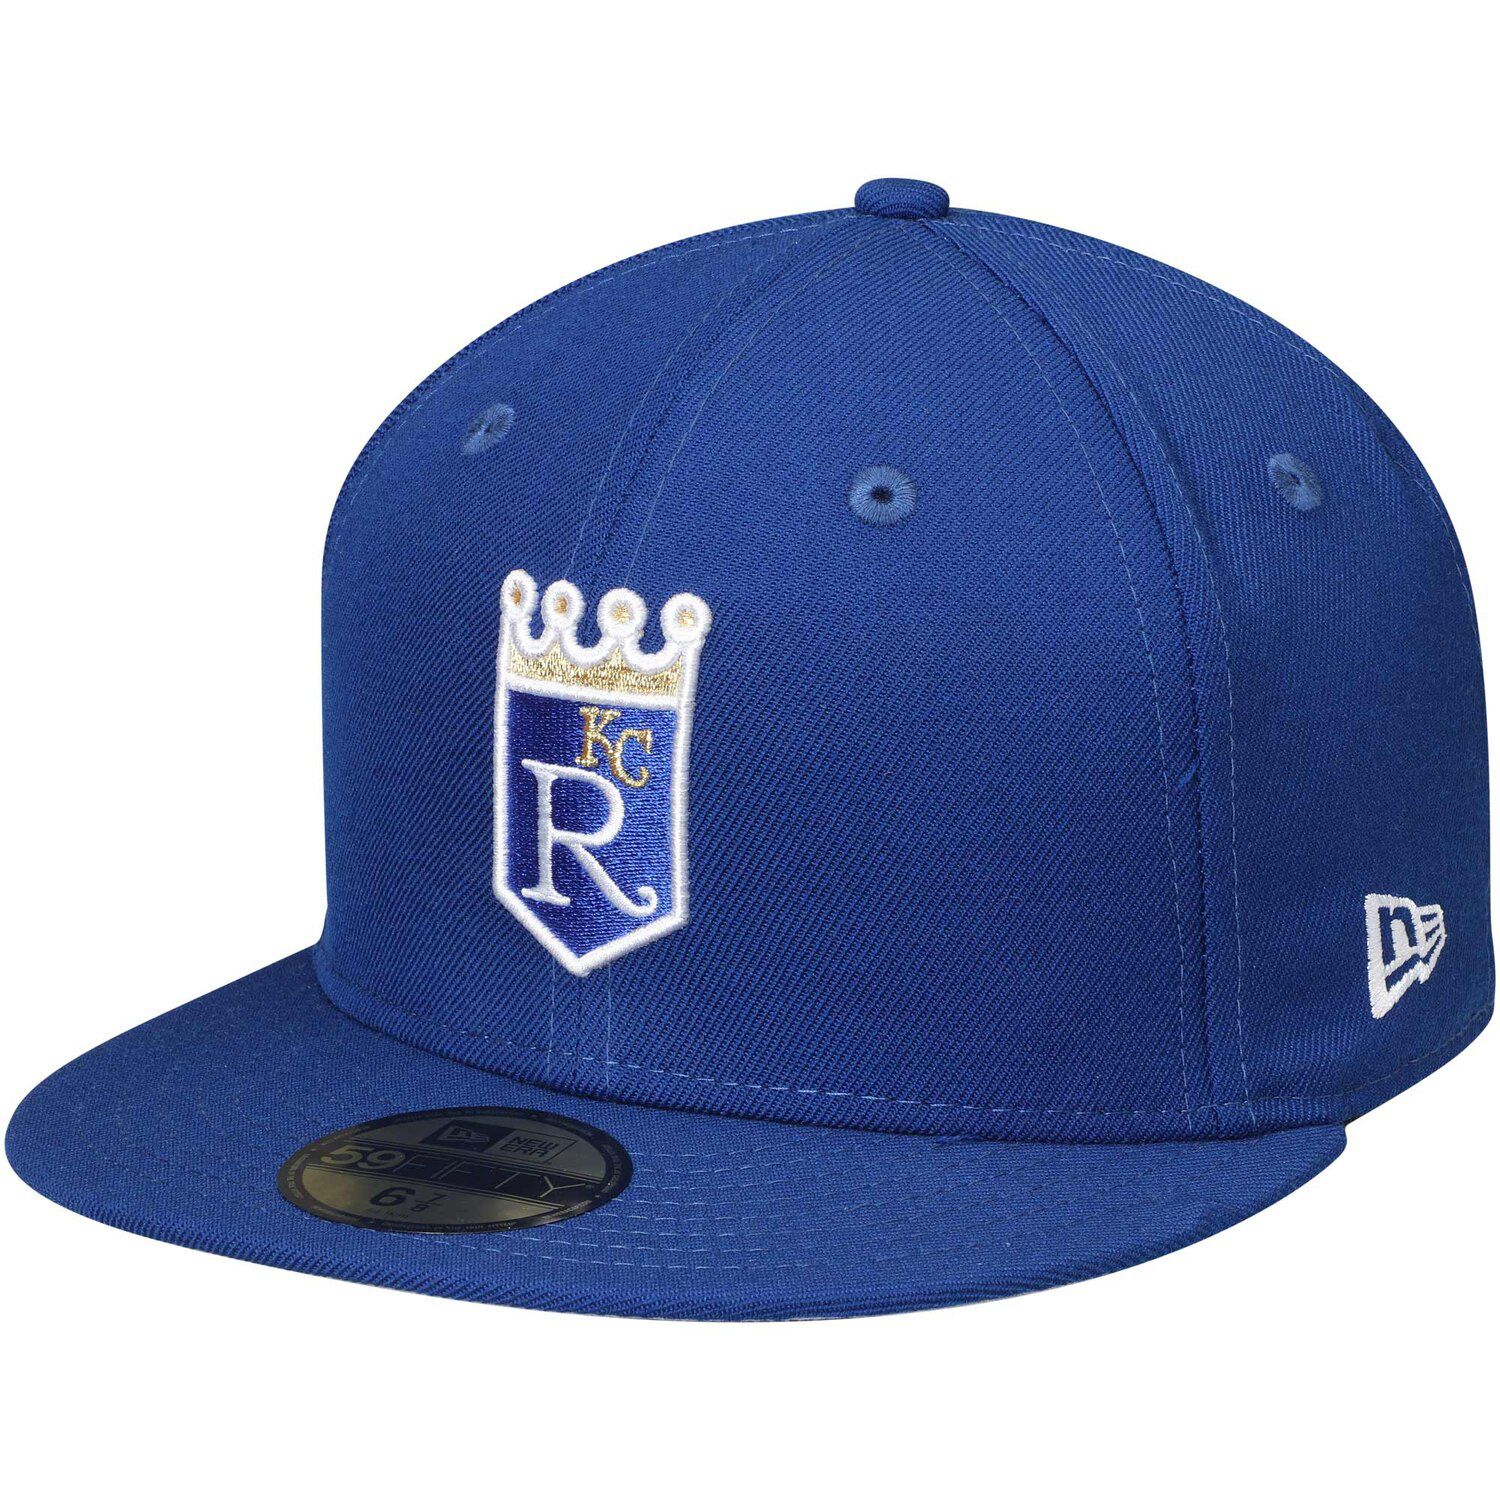 New Era Black Kansas City Royals Multi-color Pack 59fifty Fitted